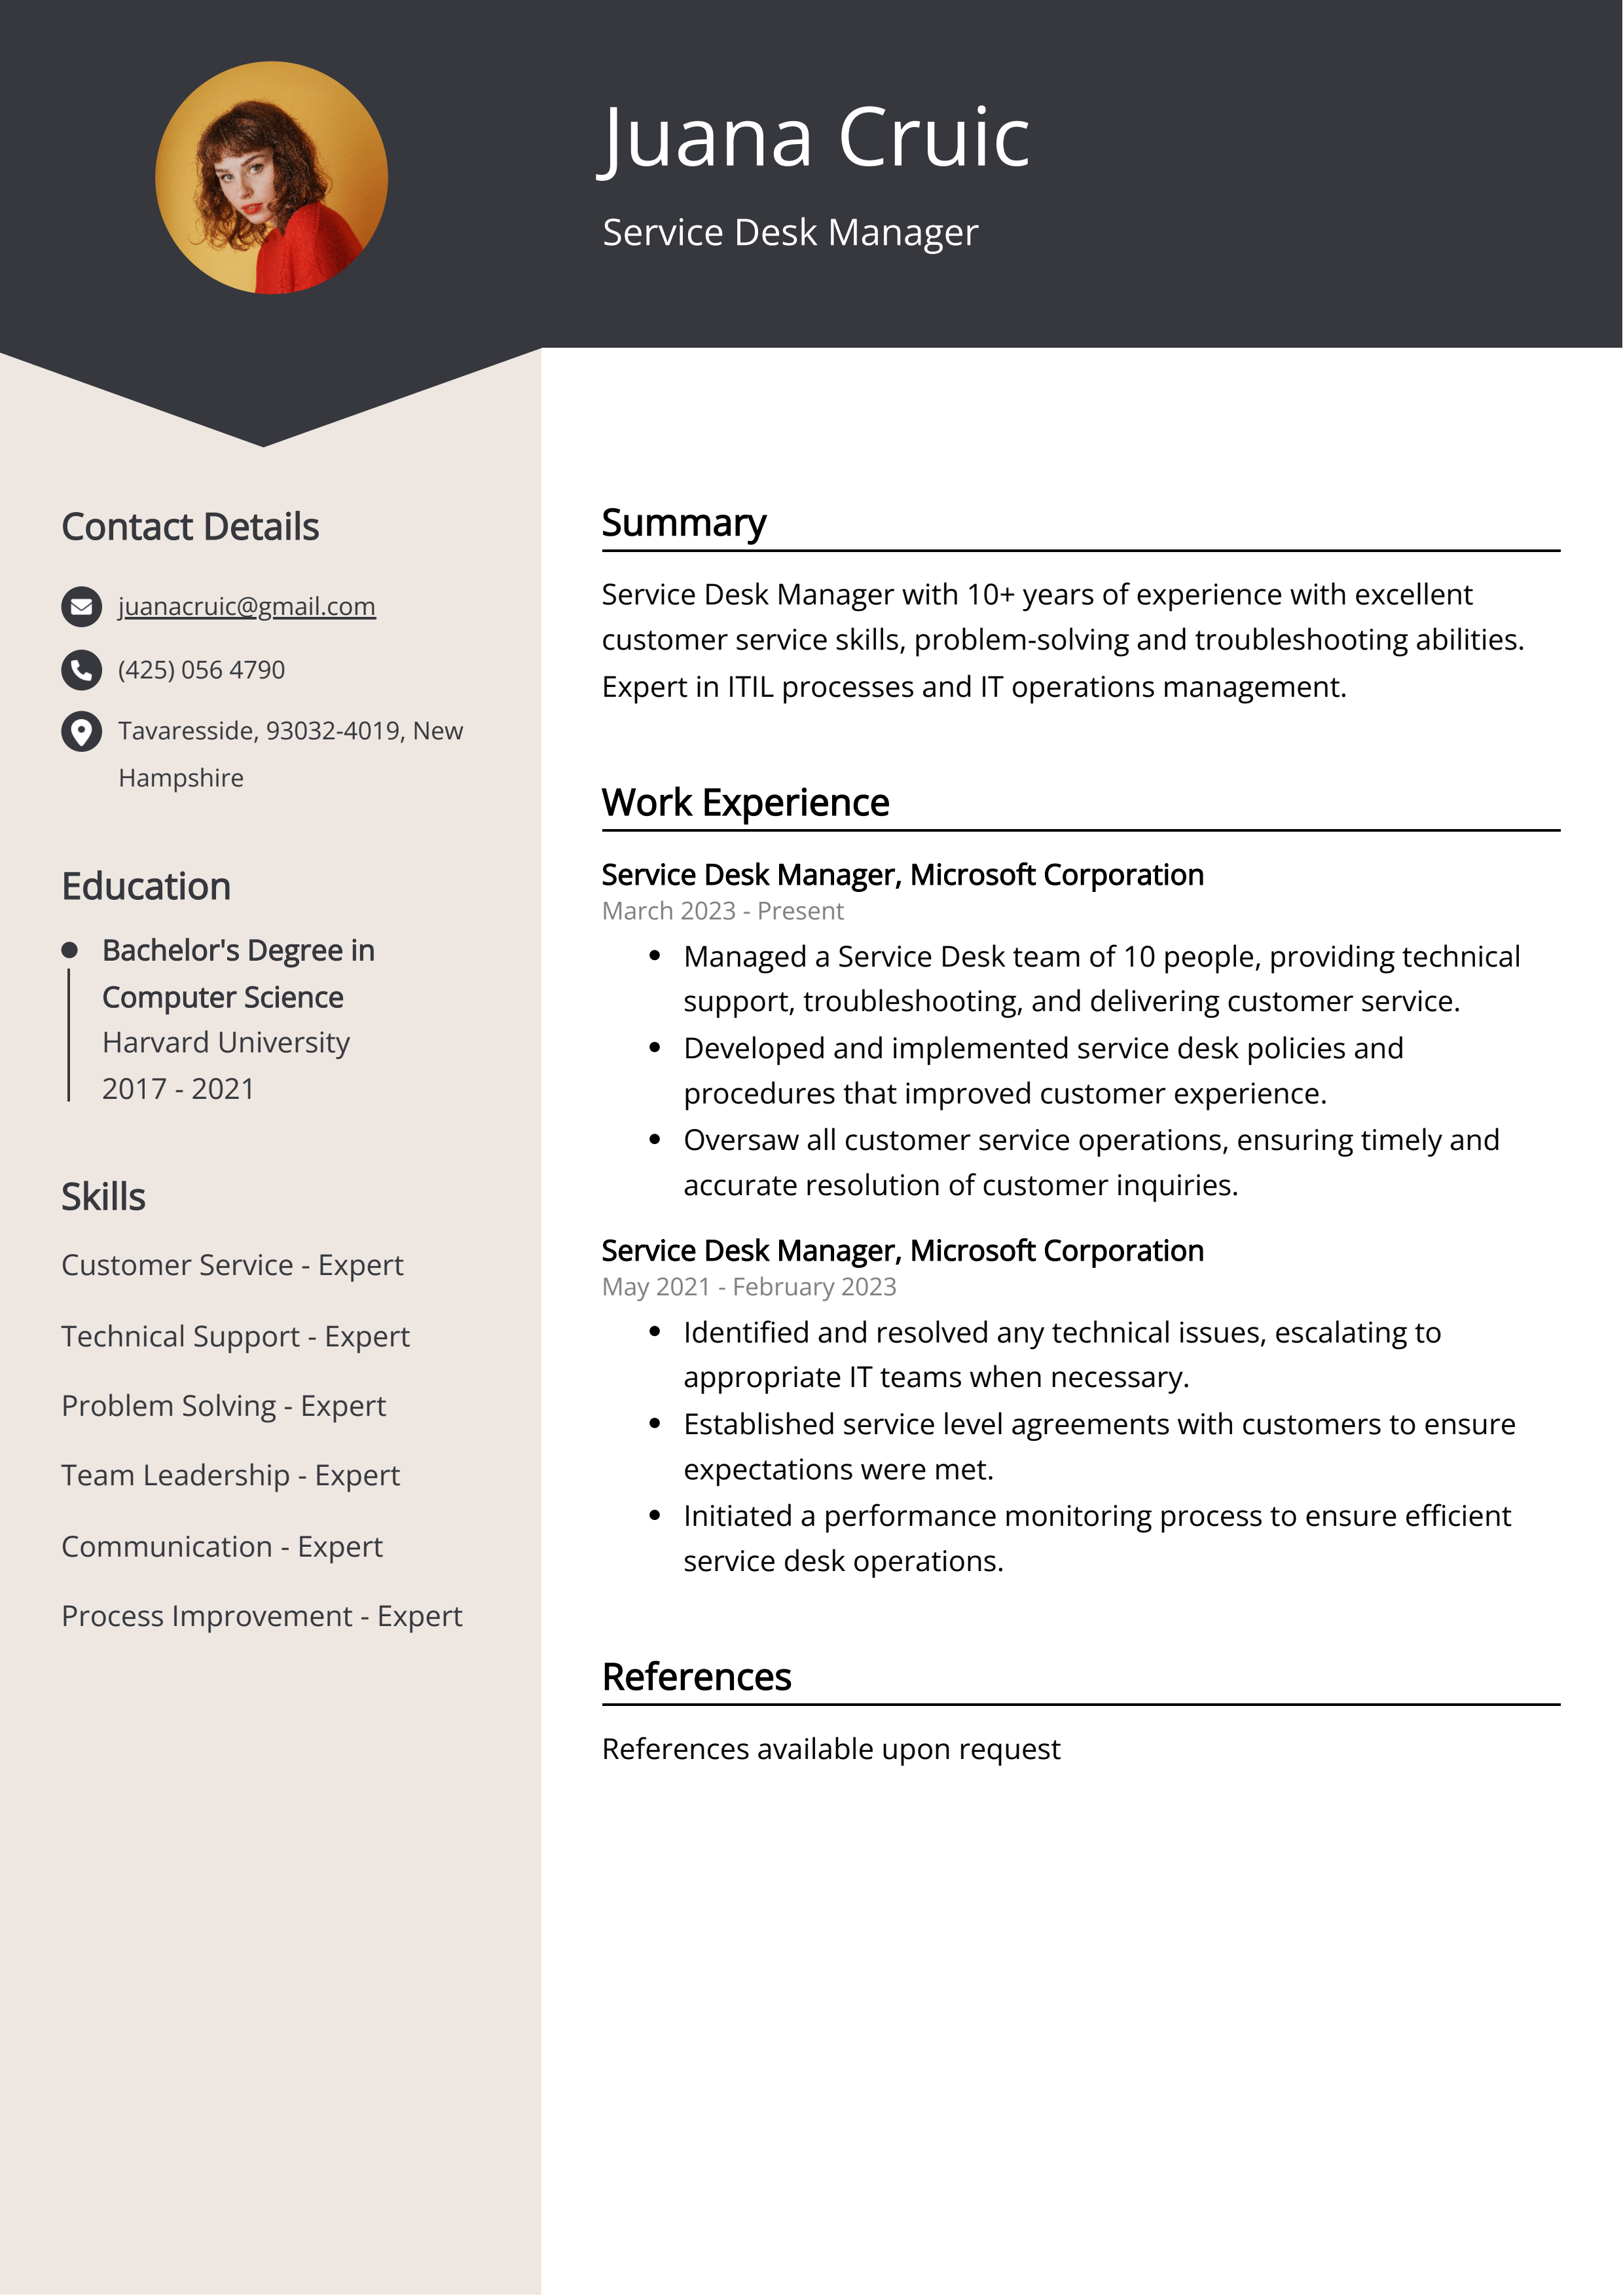 Service Desk Manager Resume Example